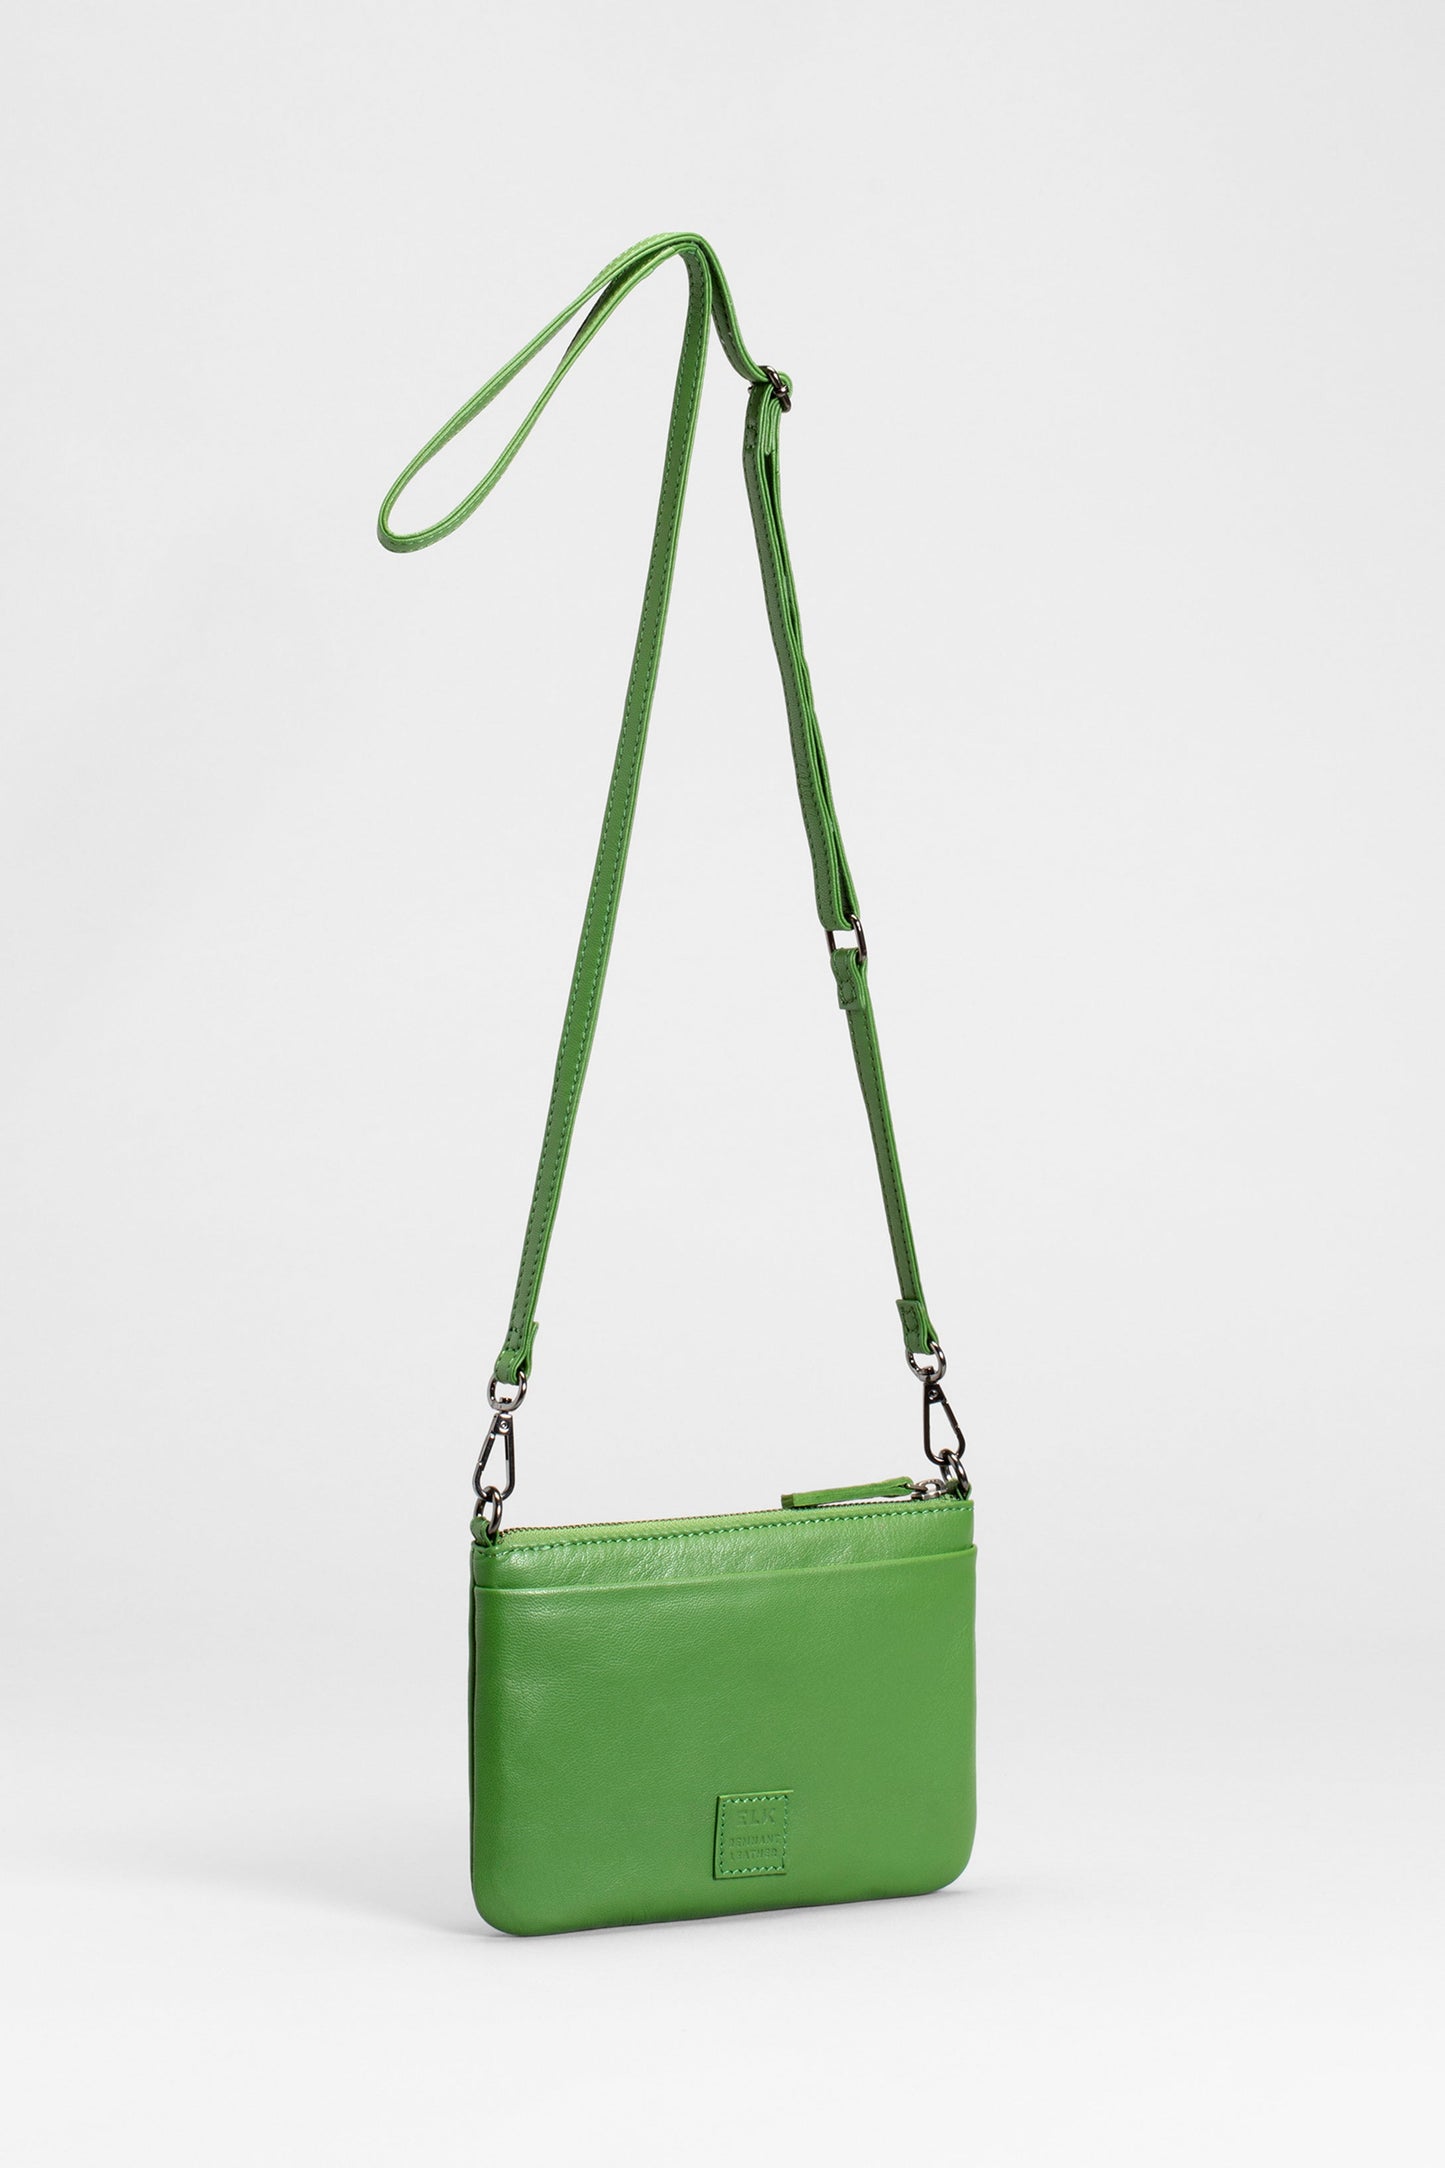 Dai remnant Leather Small Removable Strap Shoulder back Back | GRASS GREEN